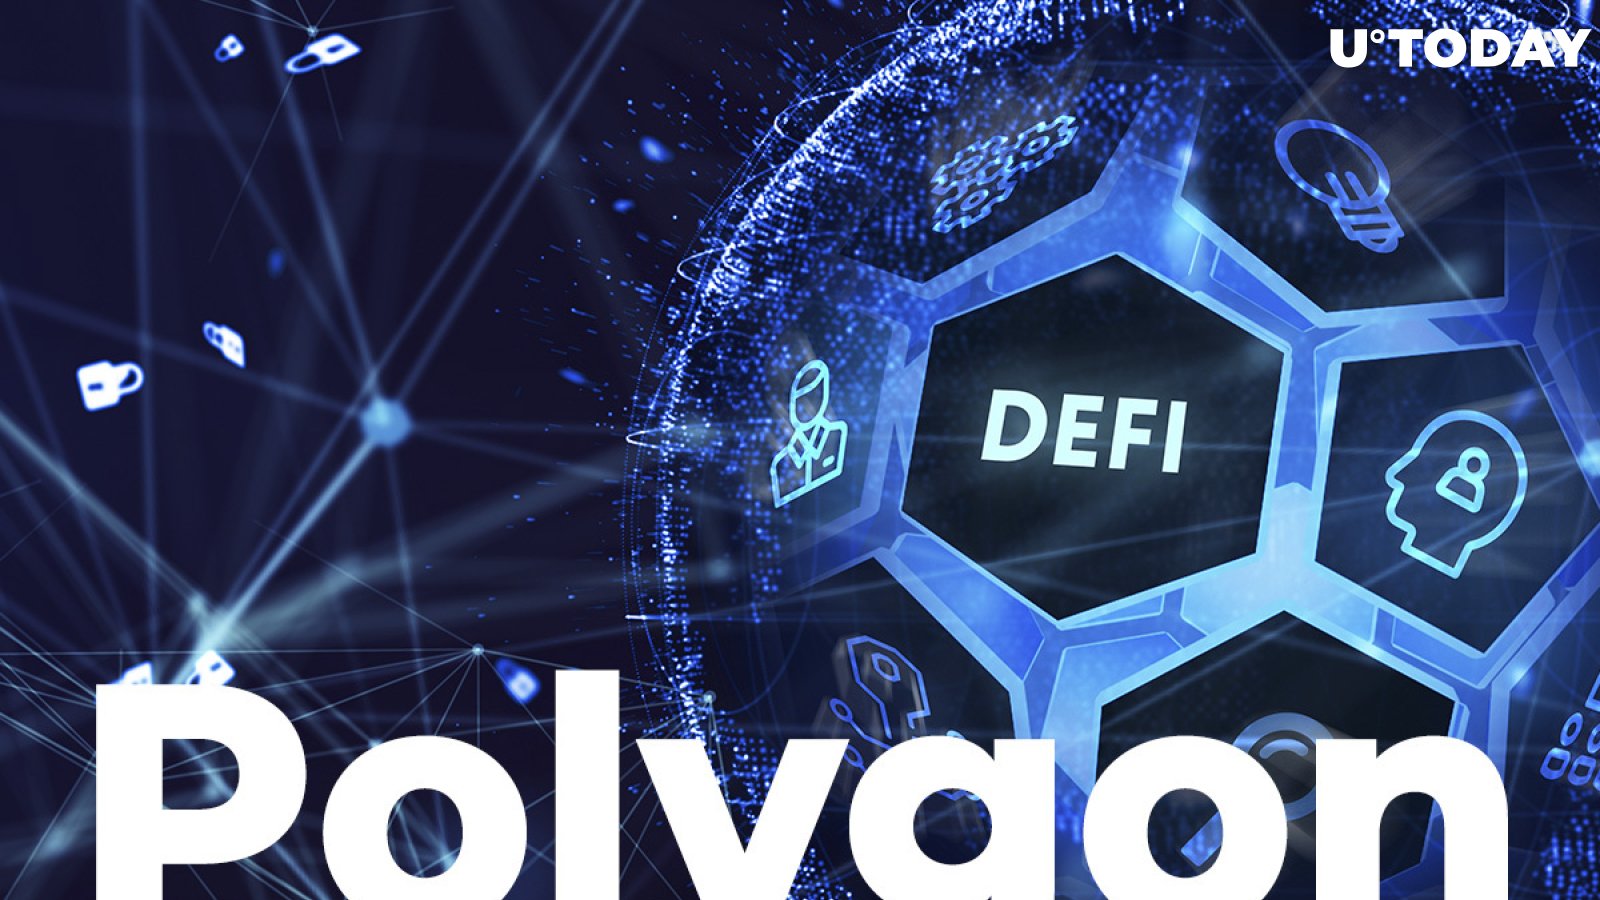 Polygon (MATIC) Expands to DeFi with Harvest Protocol Integration